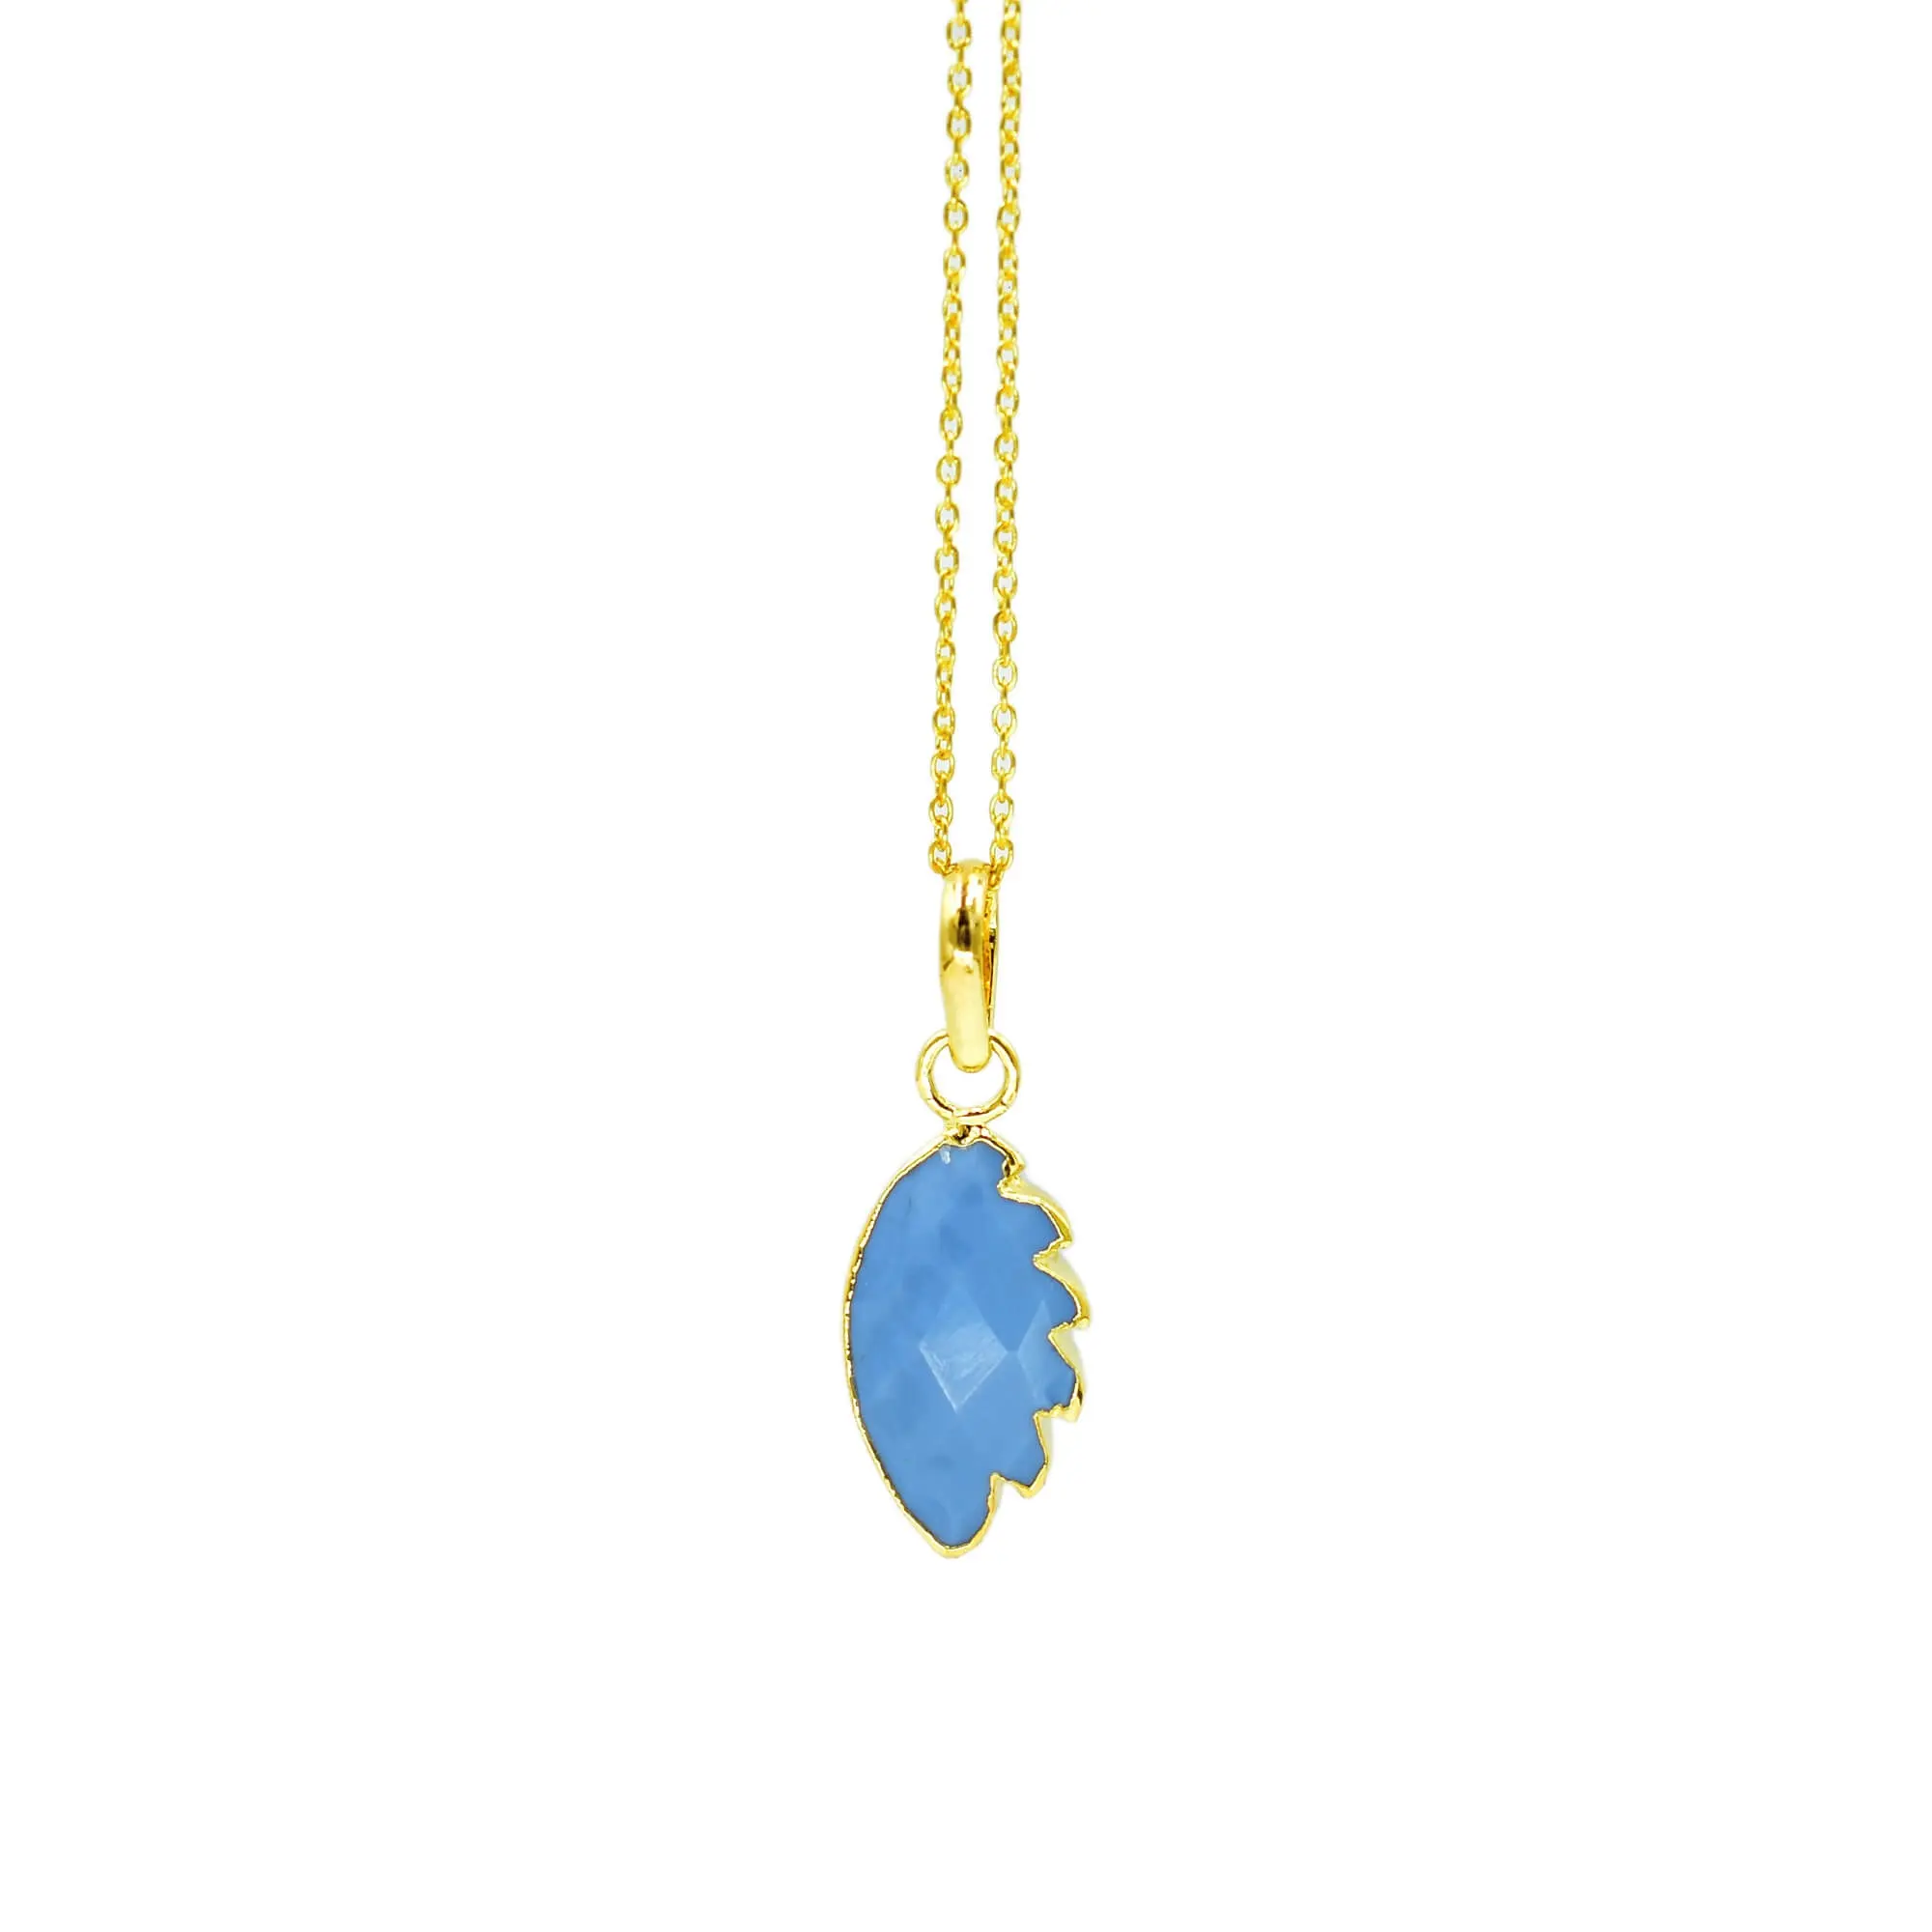 Natural blue lace agate leaf shape pendant charm necklace gold plated adjustable chain 925 sterling silver jewelry gift for her